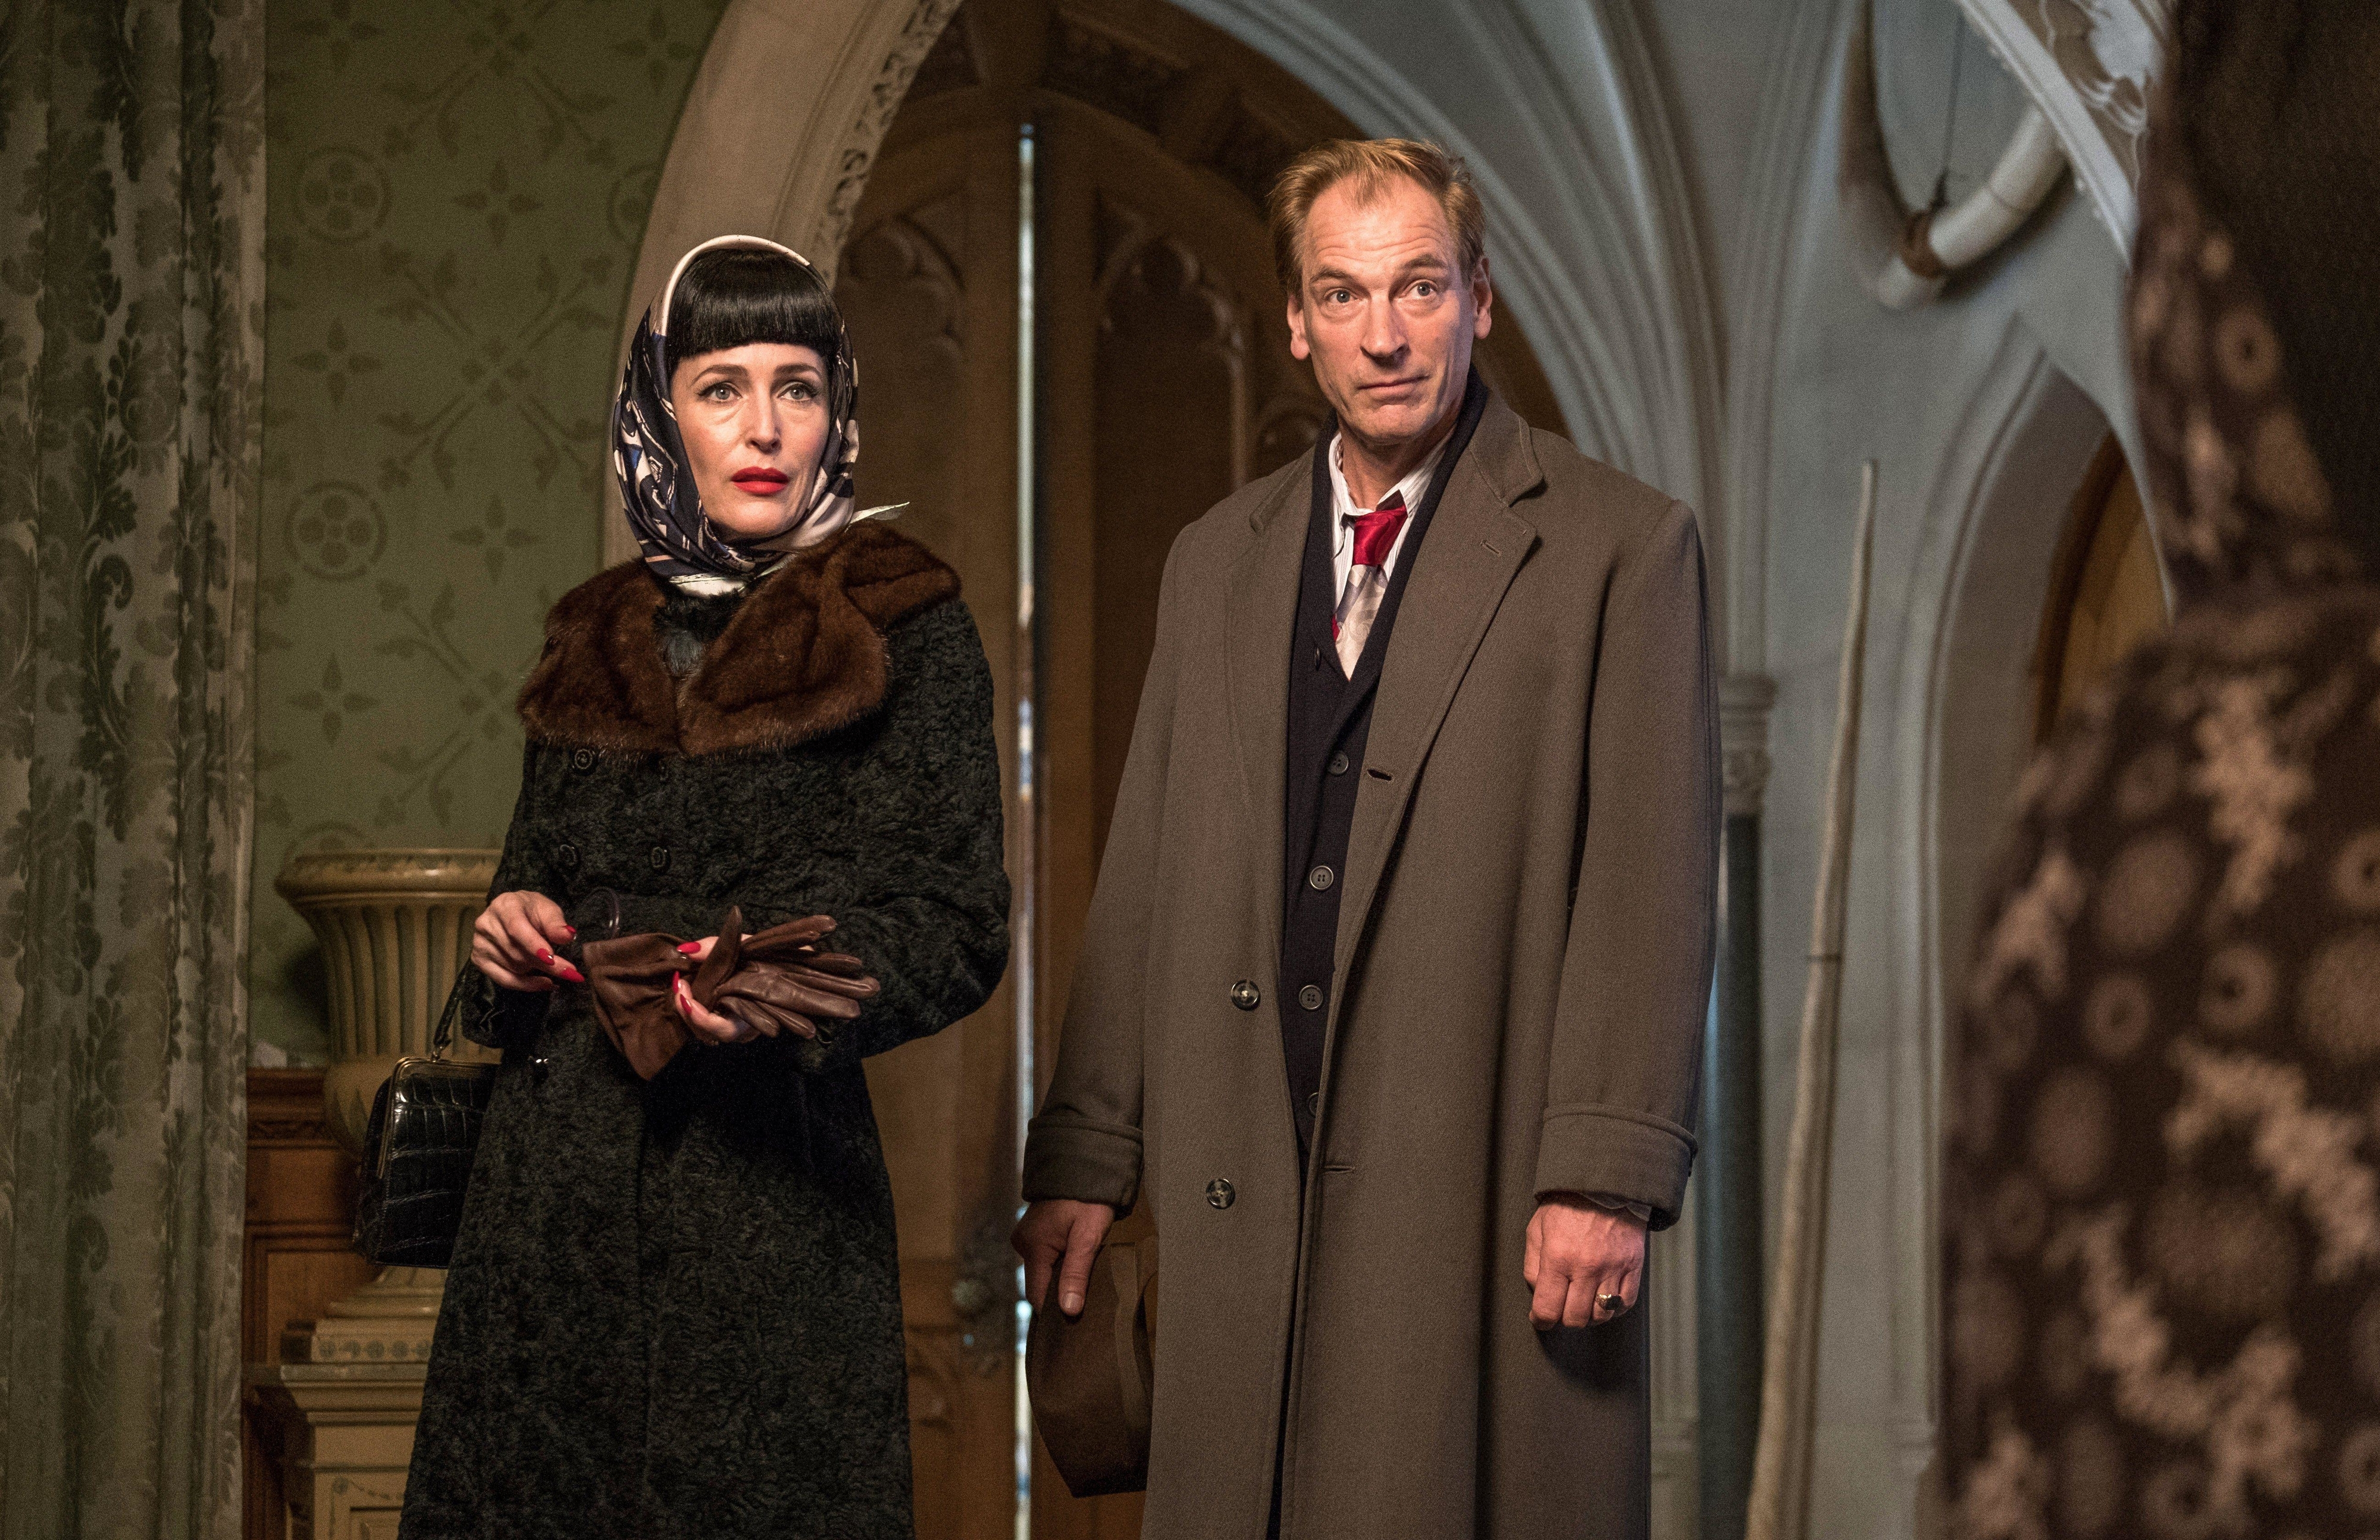 Julian Sands and Gillian Anderson adorn expensive coats in a notable estate